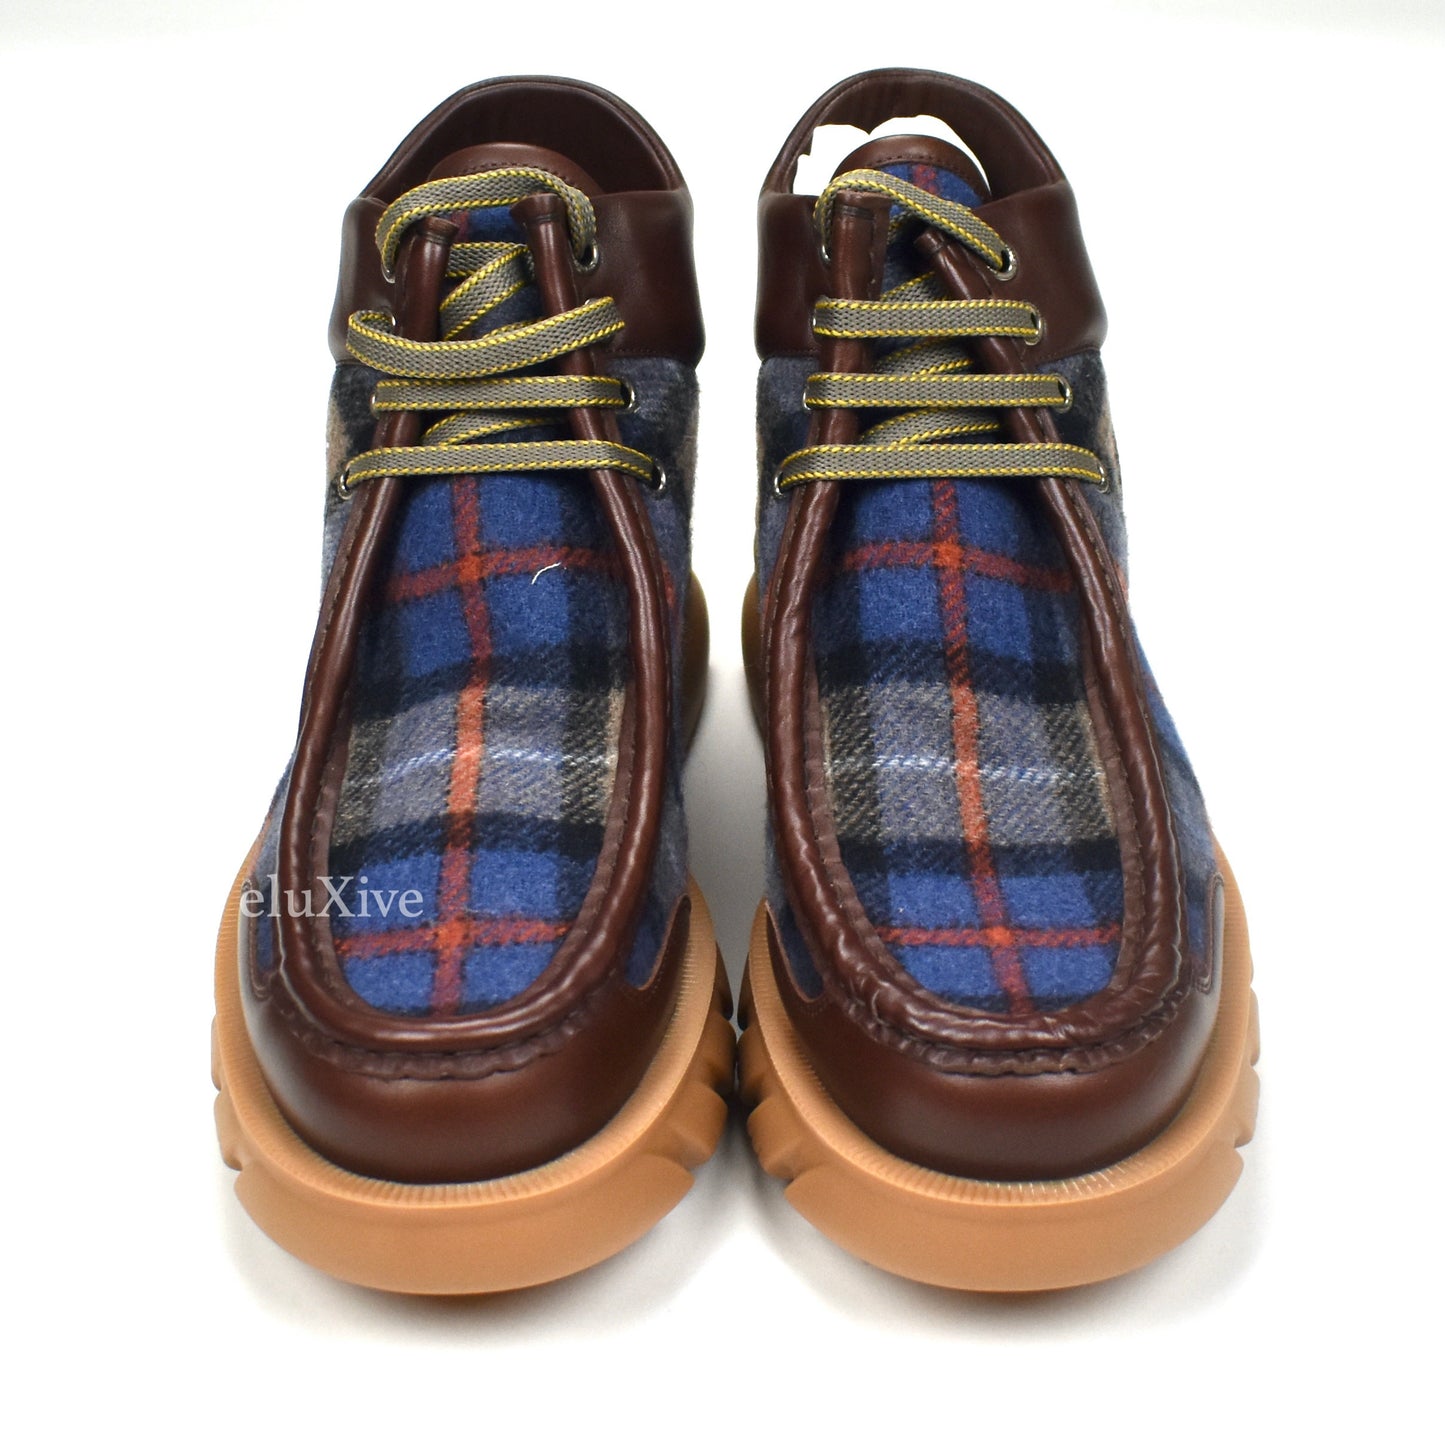 Gucci - Plaid Wool / Leather Chunky Sole Hiking Boots